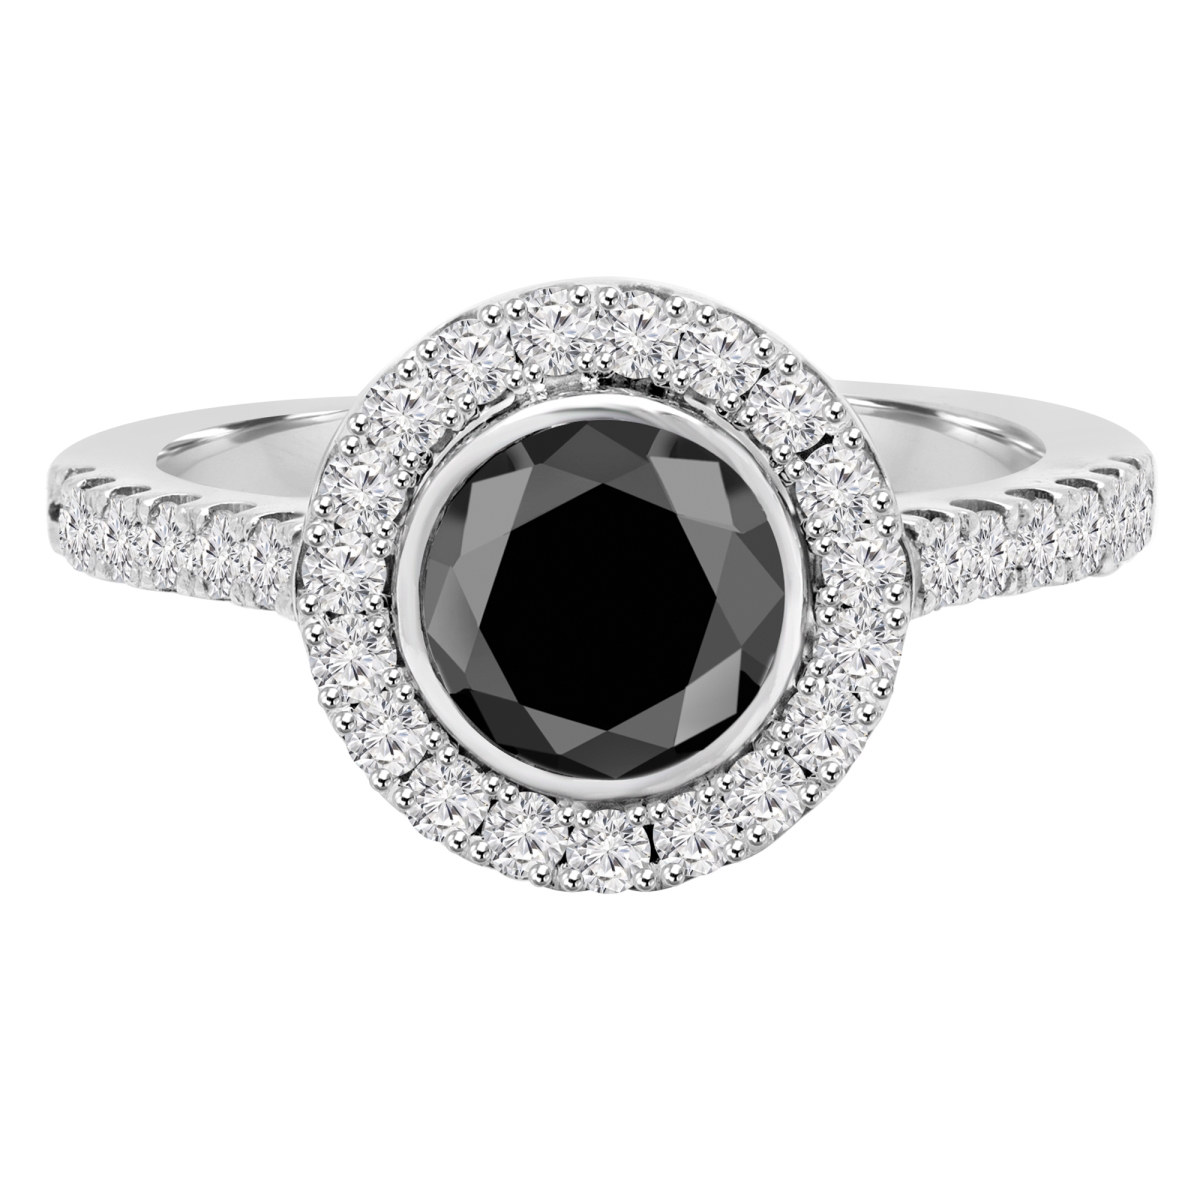 MD190288-8 2 CTW Round Black Diamond Bezel Set Halo Engagement Ring in 14K White Gold with Accents - Size 8 -  Majesty Diamonds